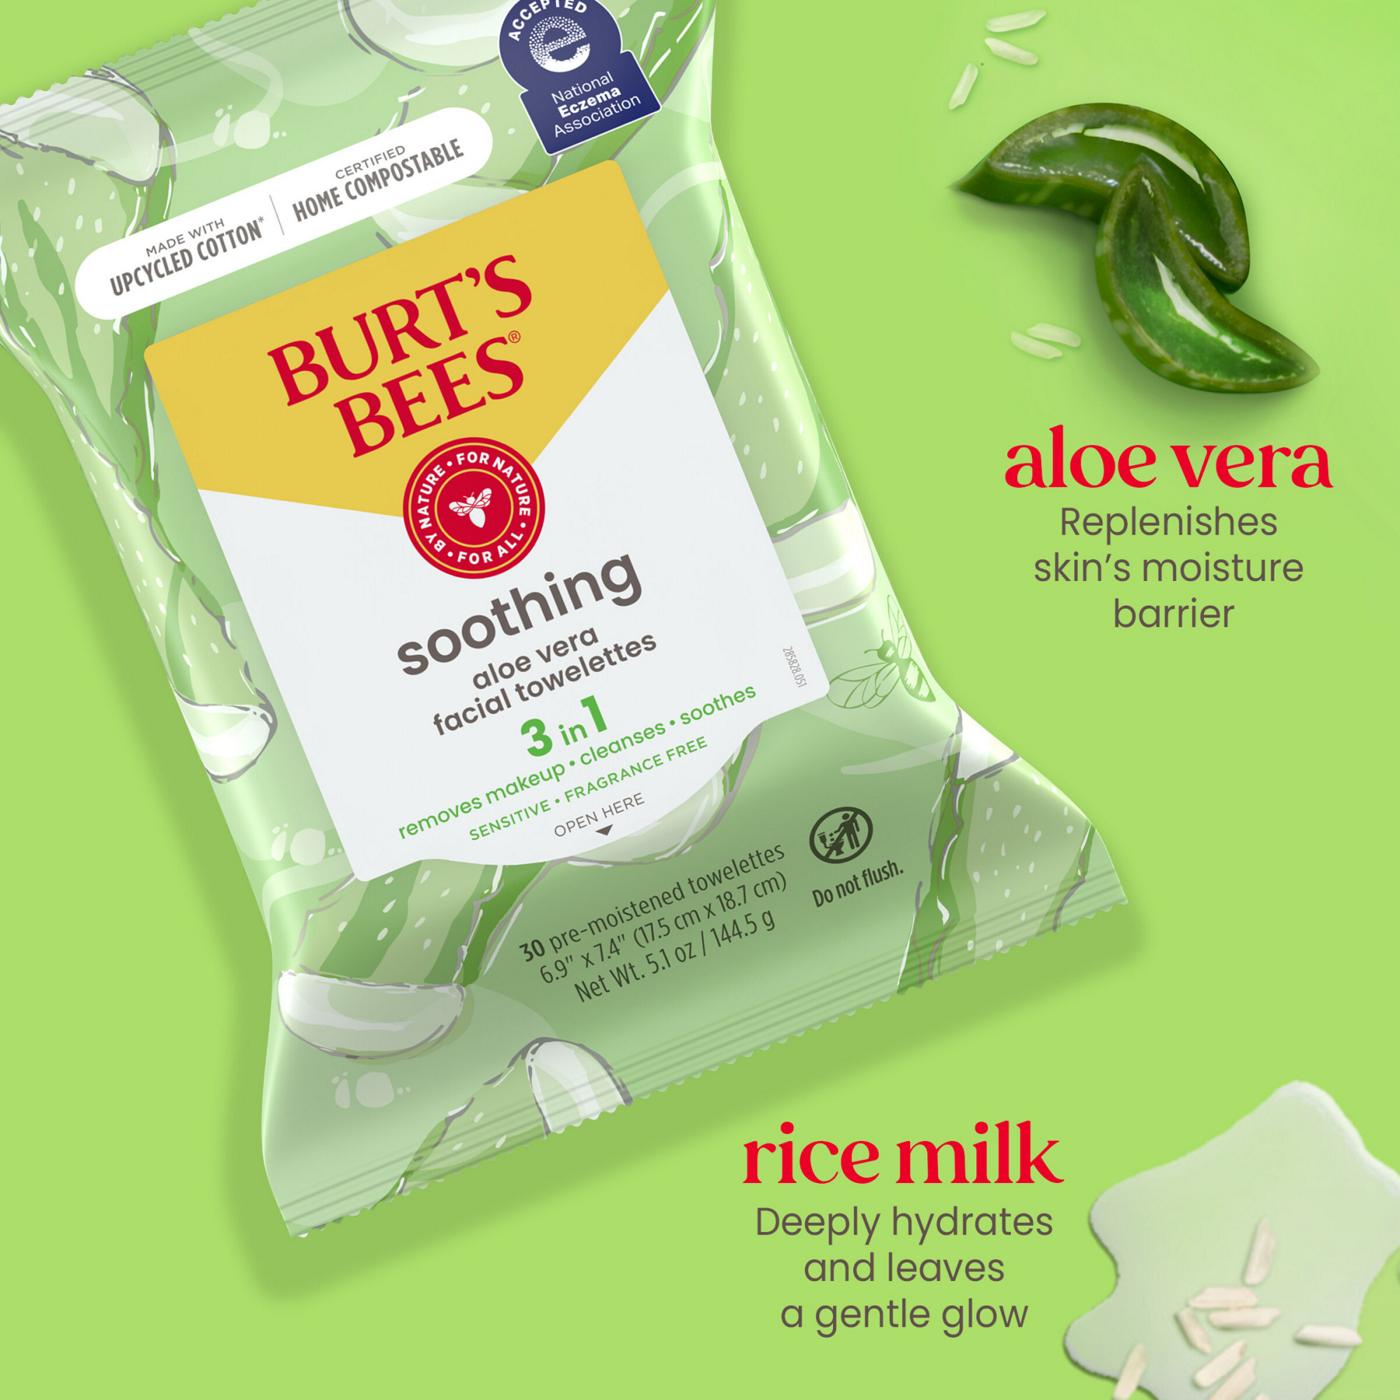 Burt's Bees Soothing Facial Towelettes - Aloe Vera; image 8 of 13